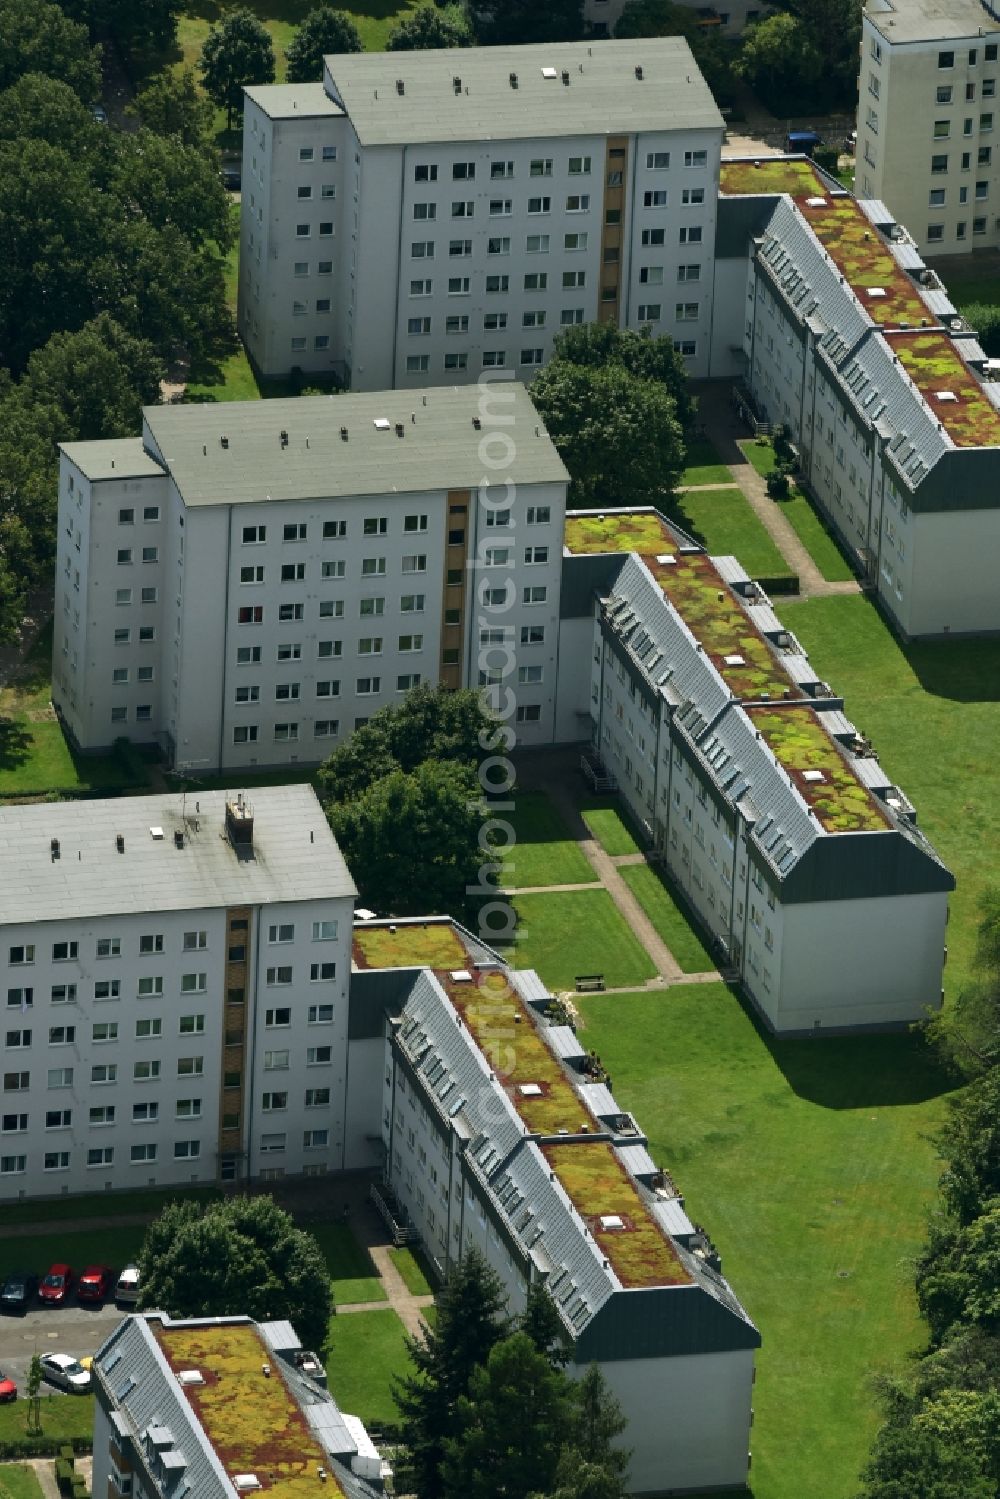 Aerial image Berlin - Skyscrapers in the residential area of industrially manufactured settlement Wedellstrasse in the district Bezirk Steglitz-Zehlendorf in Berlin, Germany